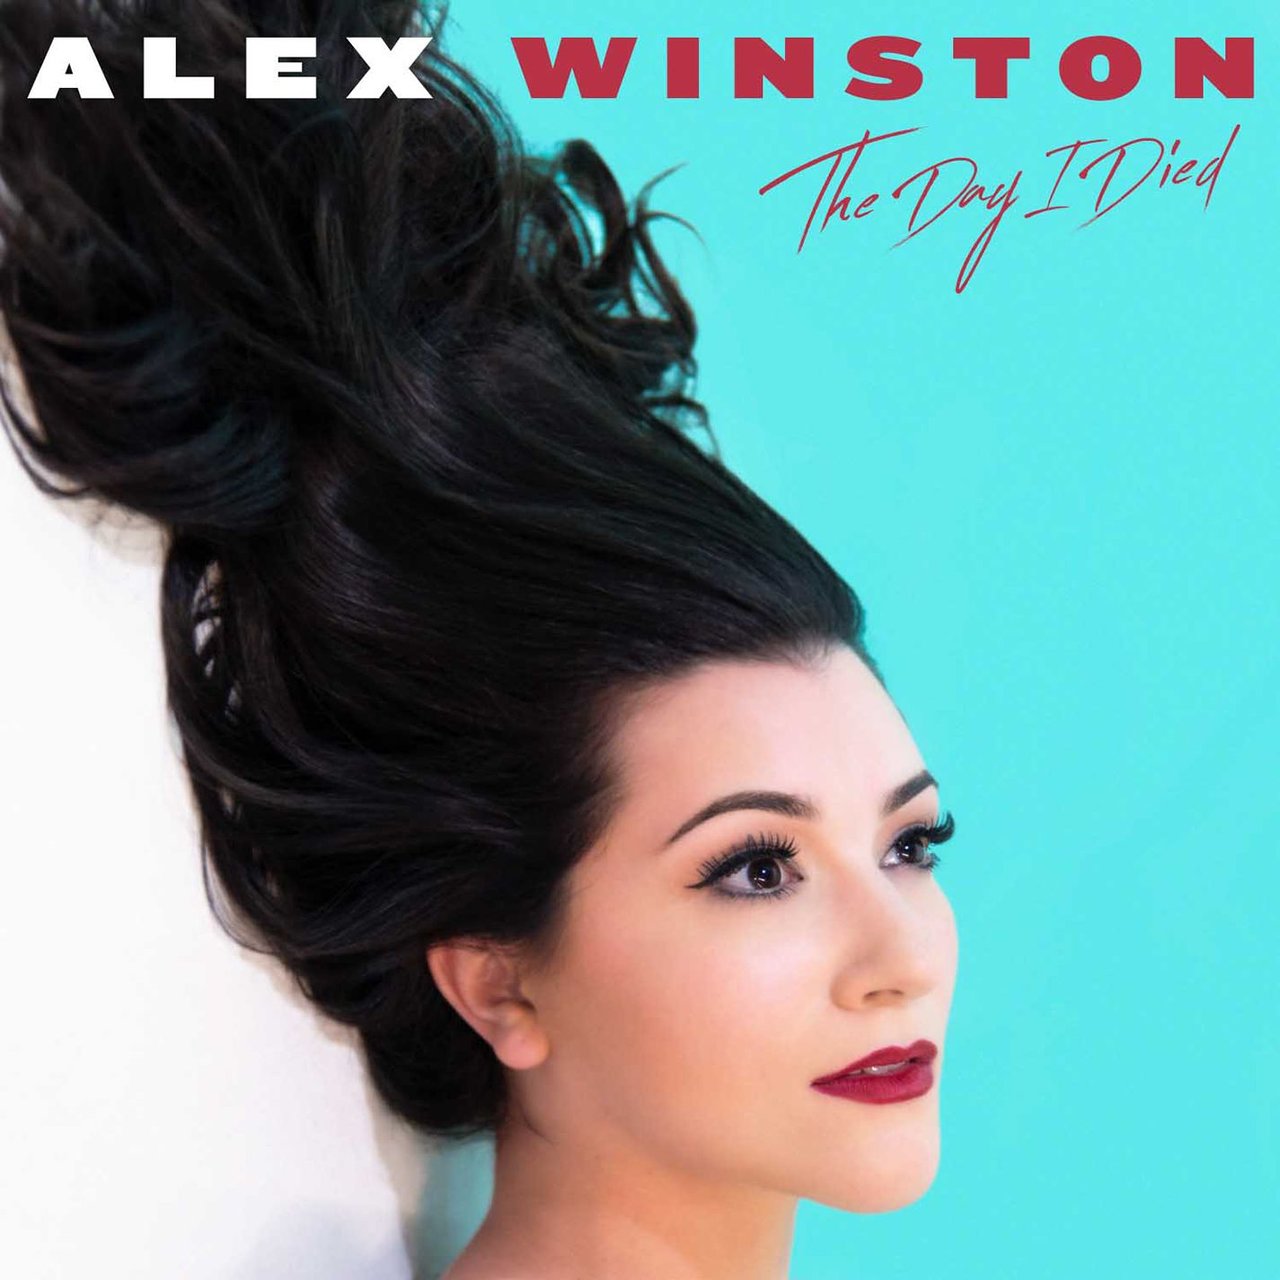 Alex Winston The Day I Died EP cover artwork